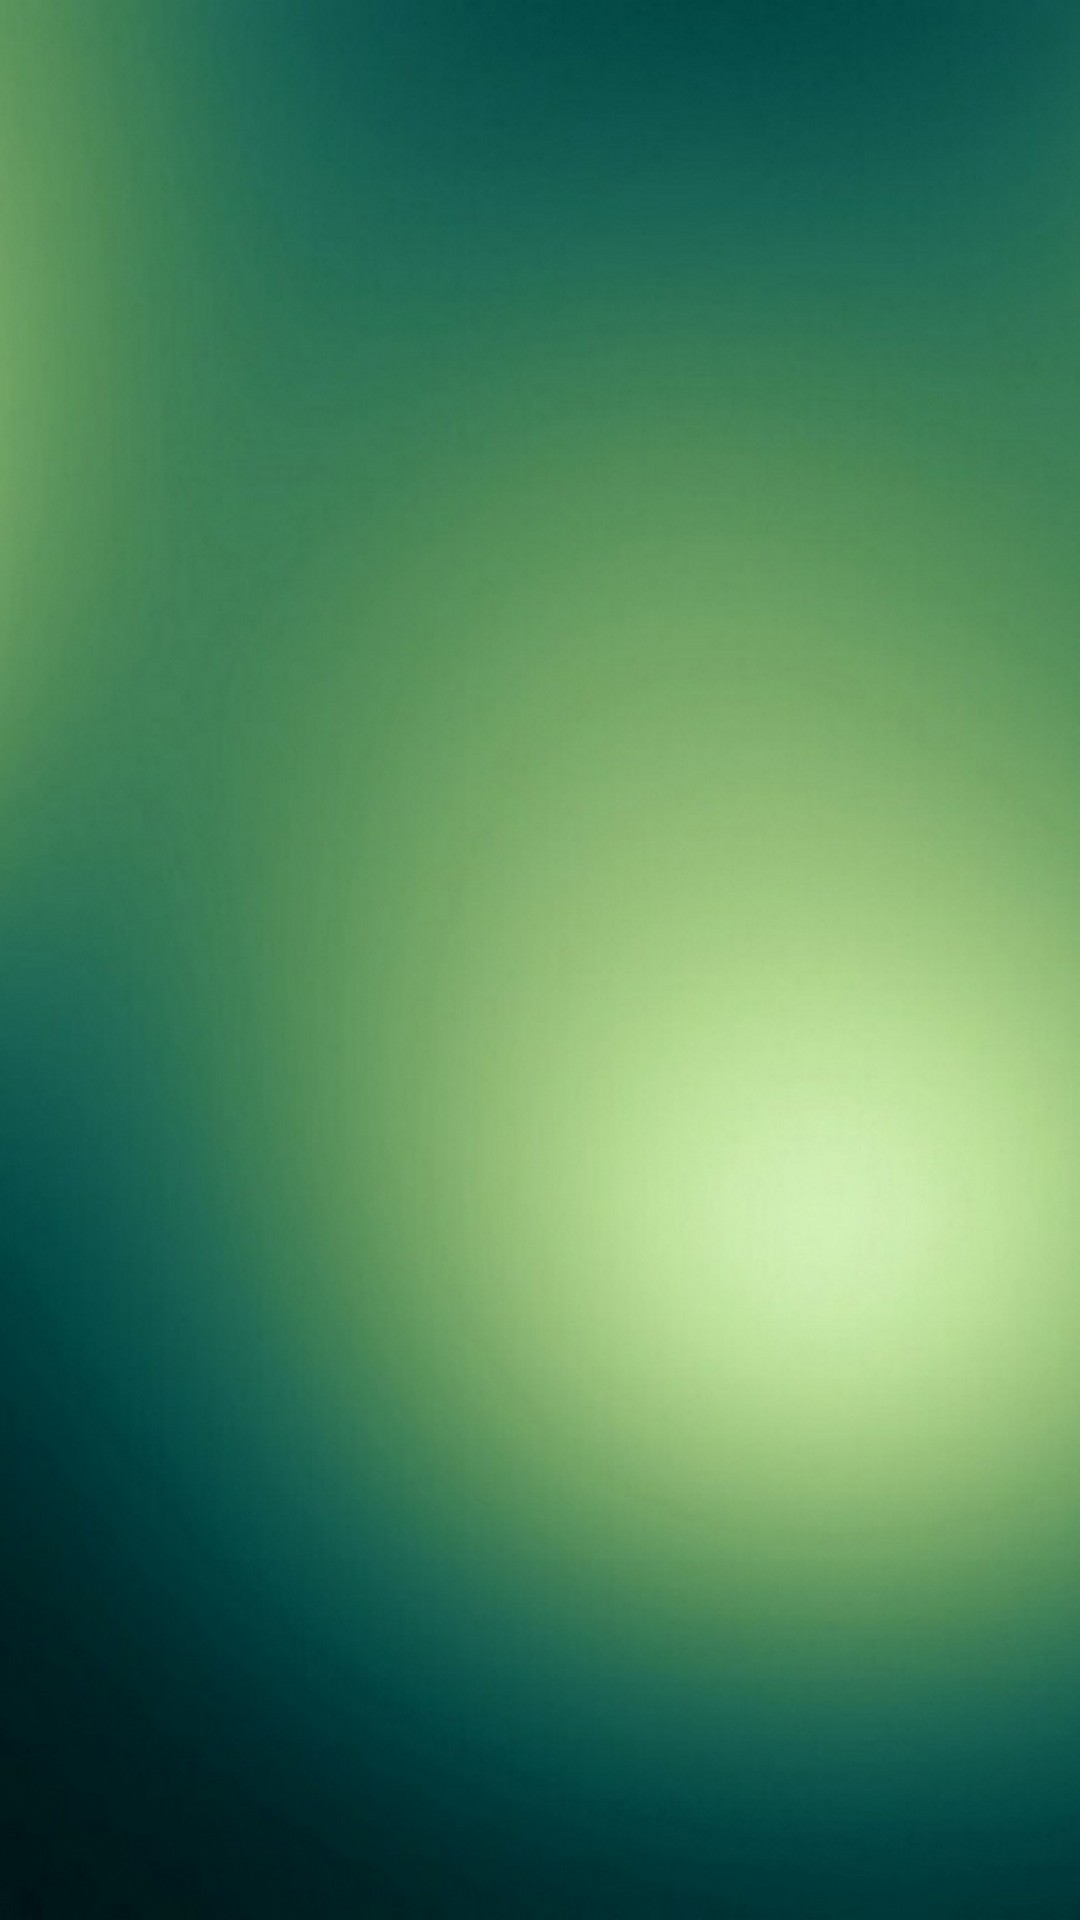 Wallpaper Emerald Green Android with image resolution 1080x1920 pixel. You can make this wallpaper for your Android backgrounds, Tablet, Smartphones Screensavers and Mobile Phone Lock Screen